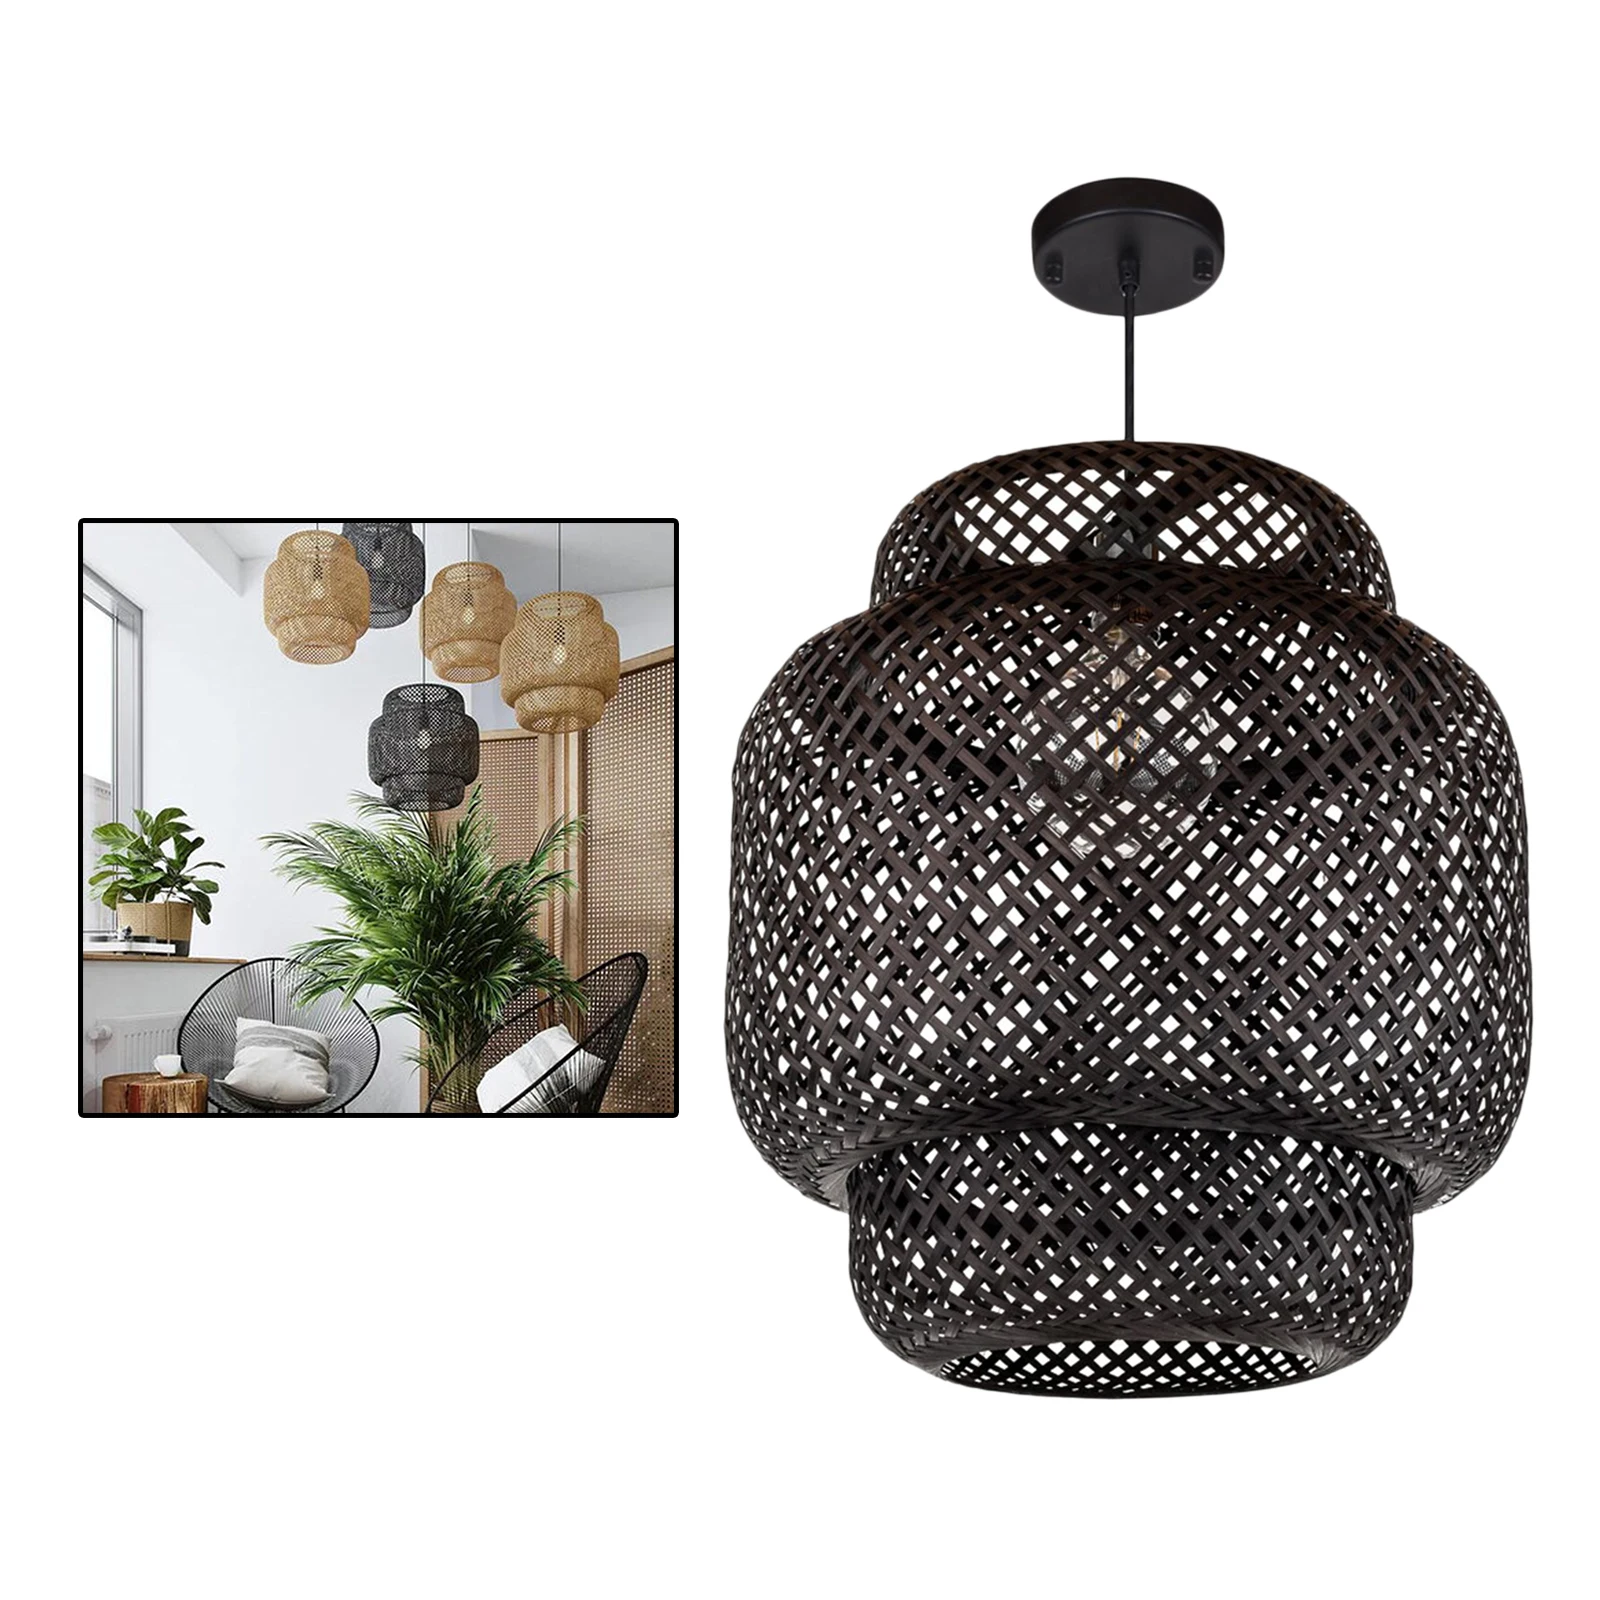 1 Pc Rattan Woven Portable Lamp Protective Cover for Home Shop 